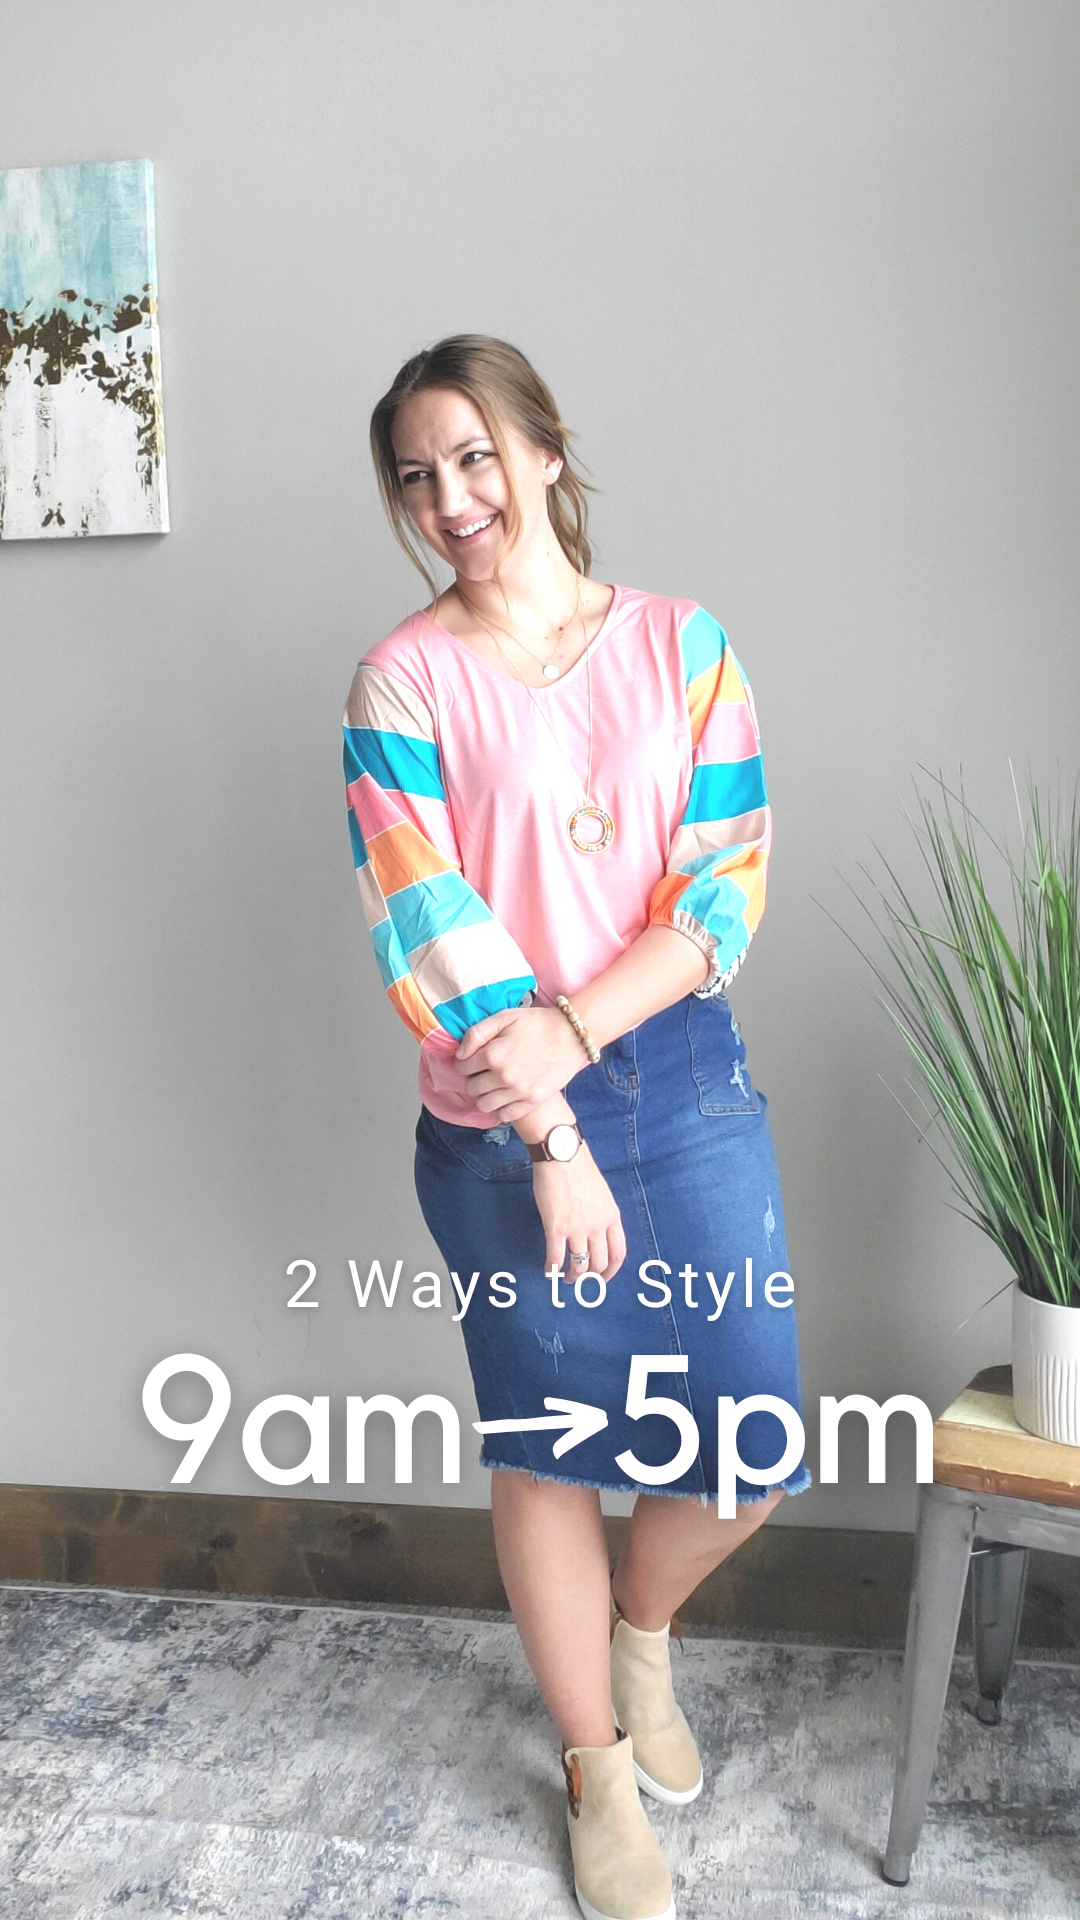 2 Ways to Style: Pink Dolman Top